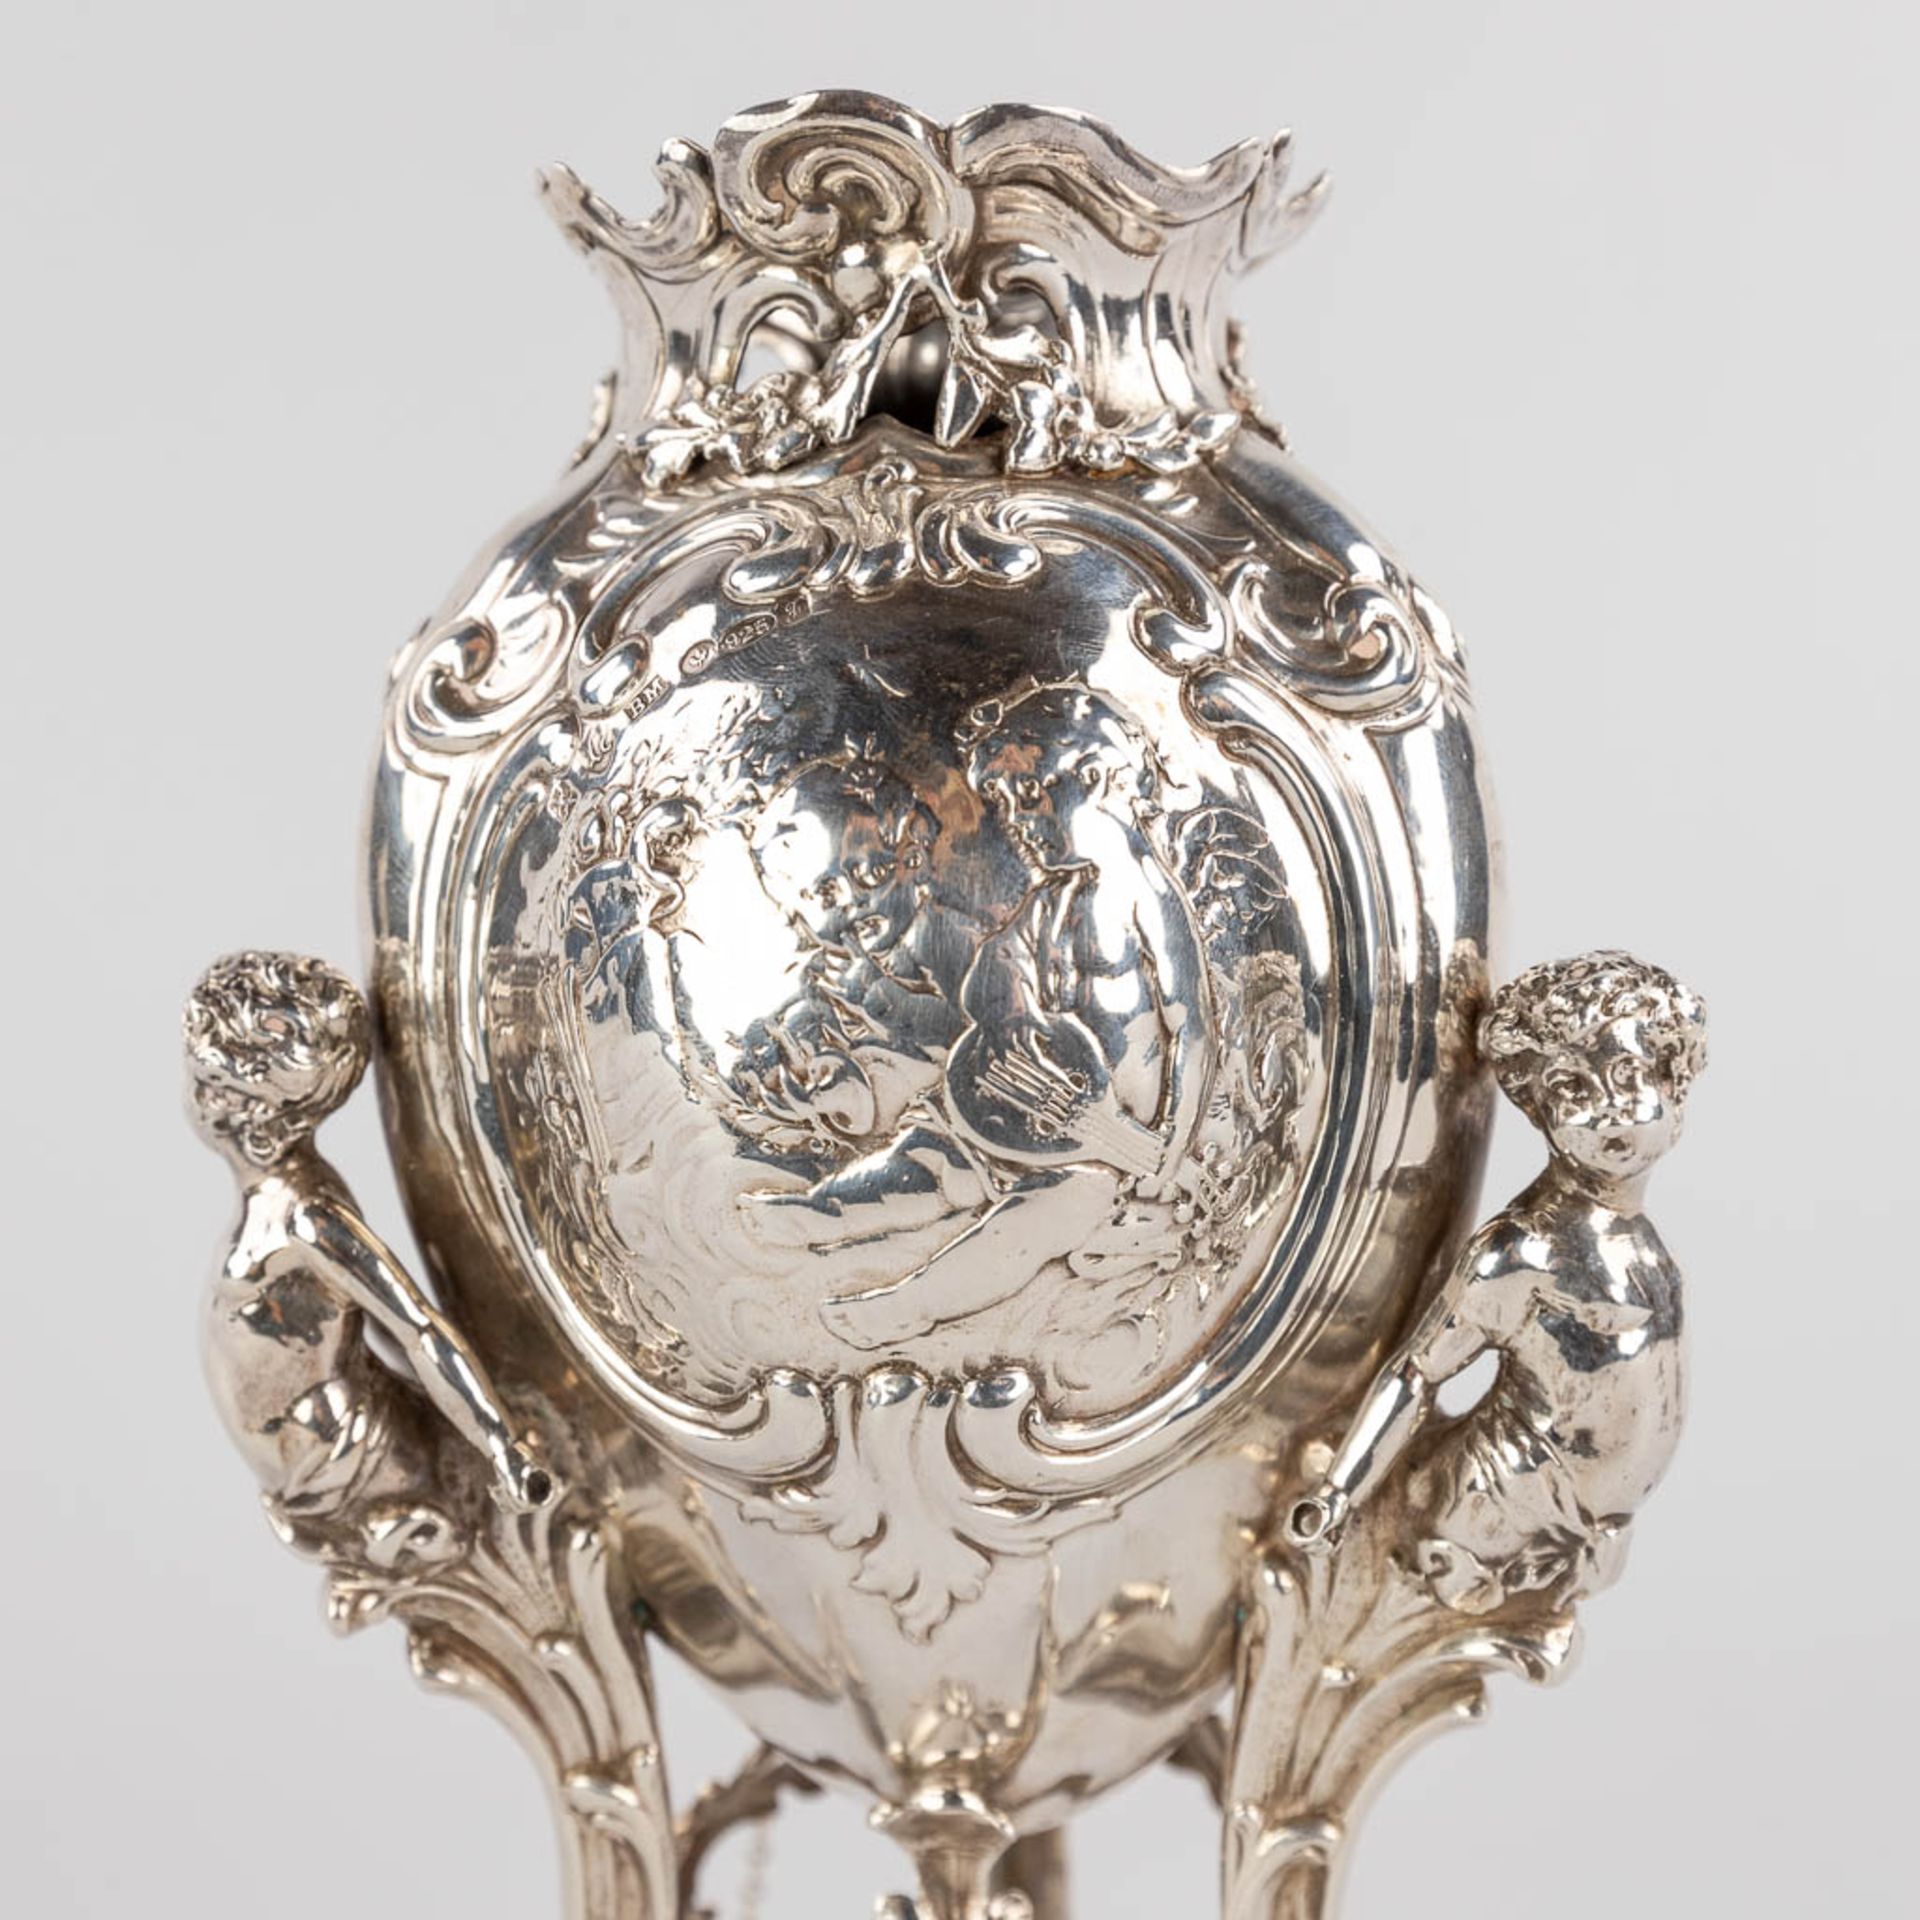 A fine vase, silver in Louis XV style, mounted with 3 putto. 427g. 1906. (D:11 x W:11 x H:20 cm) - Image 9 of 12